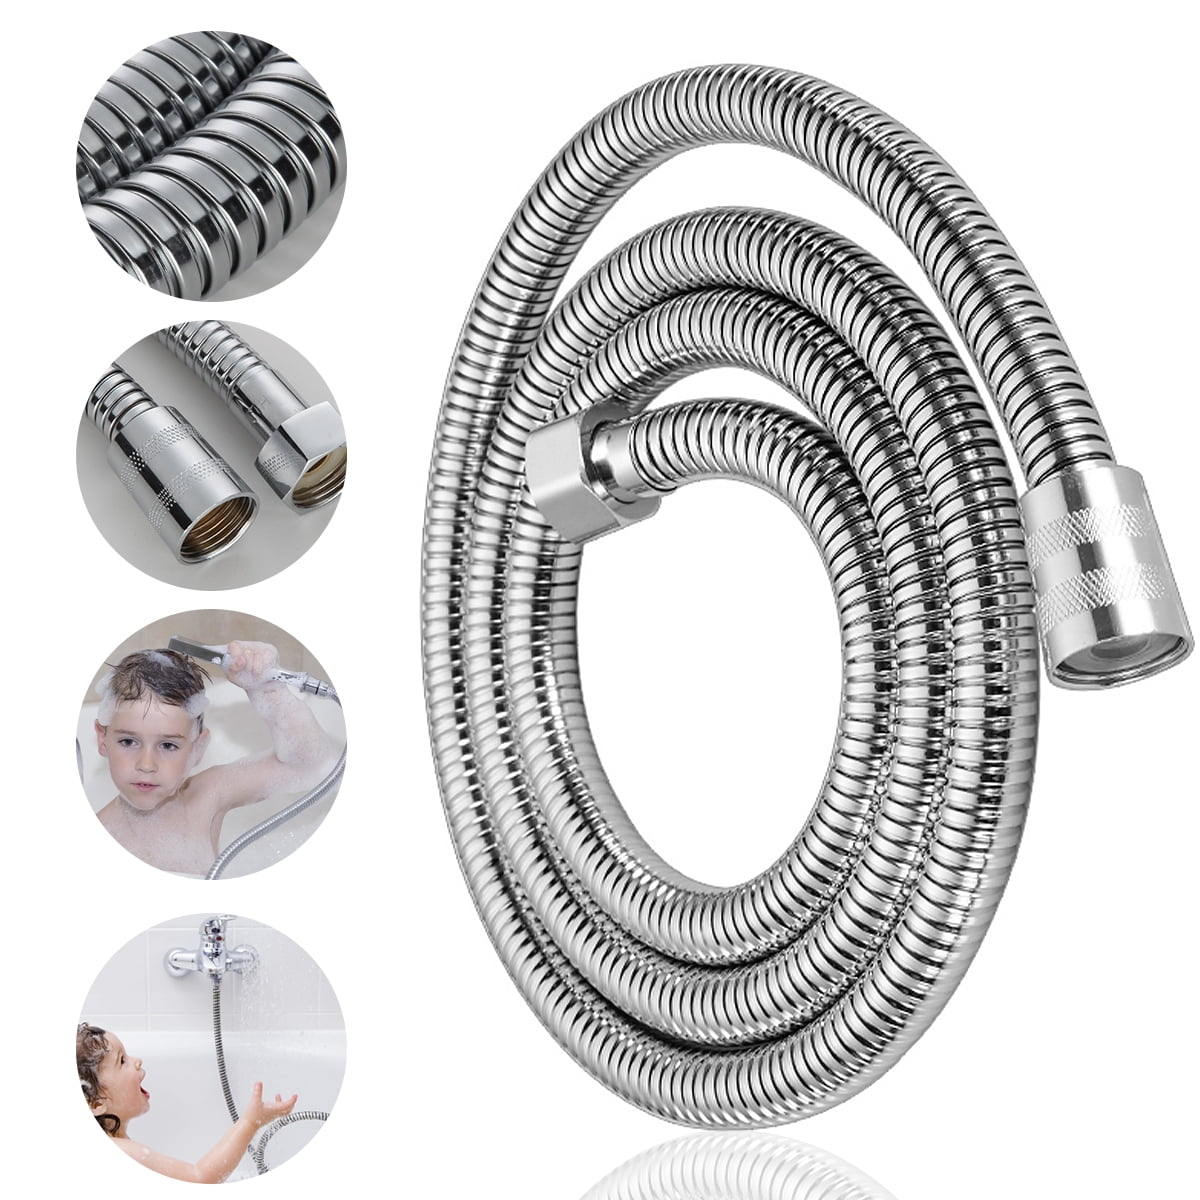 Purelux 100 Inch Extra Long Double Lock Stainless Steel Replacement Shower Hose for sale online 